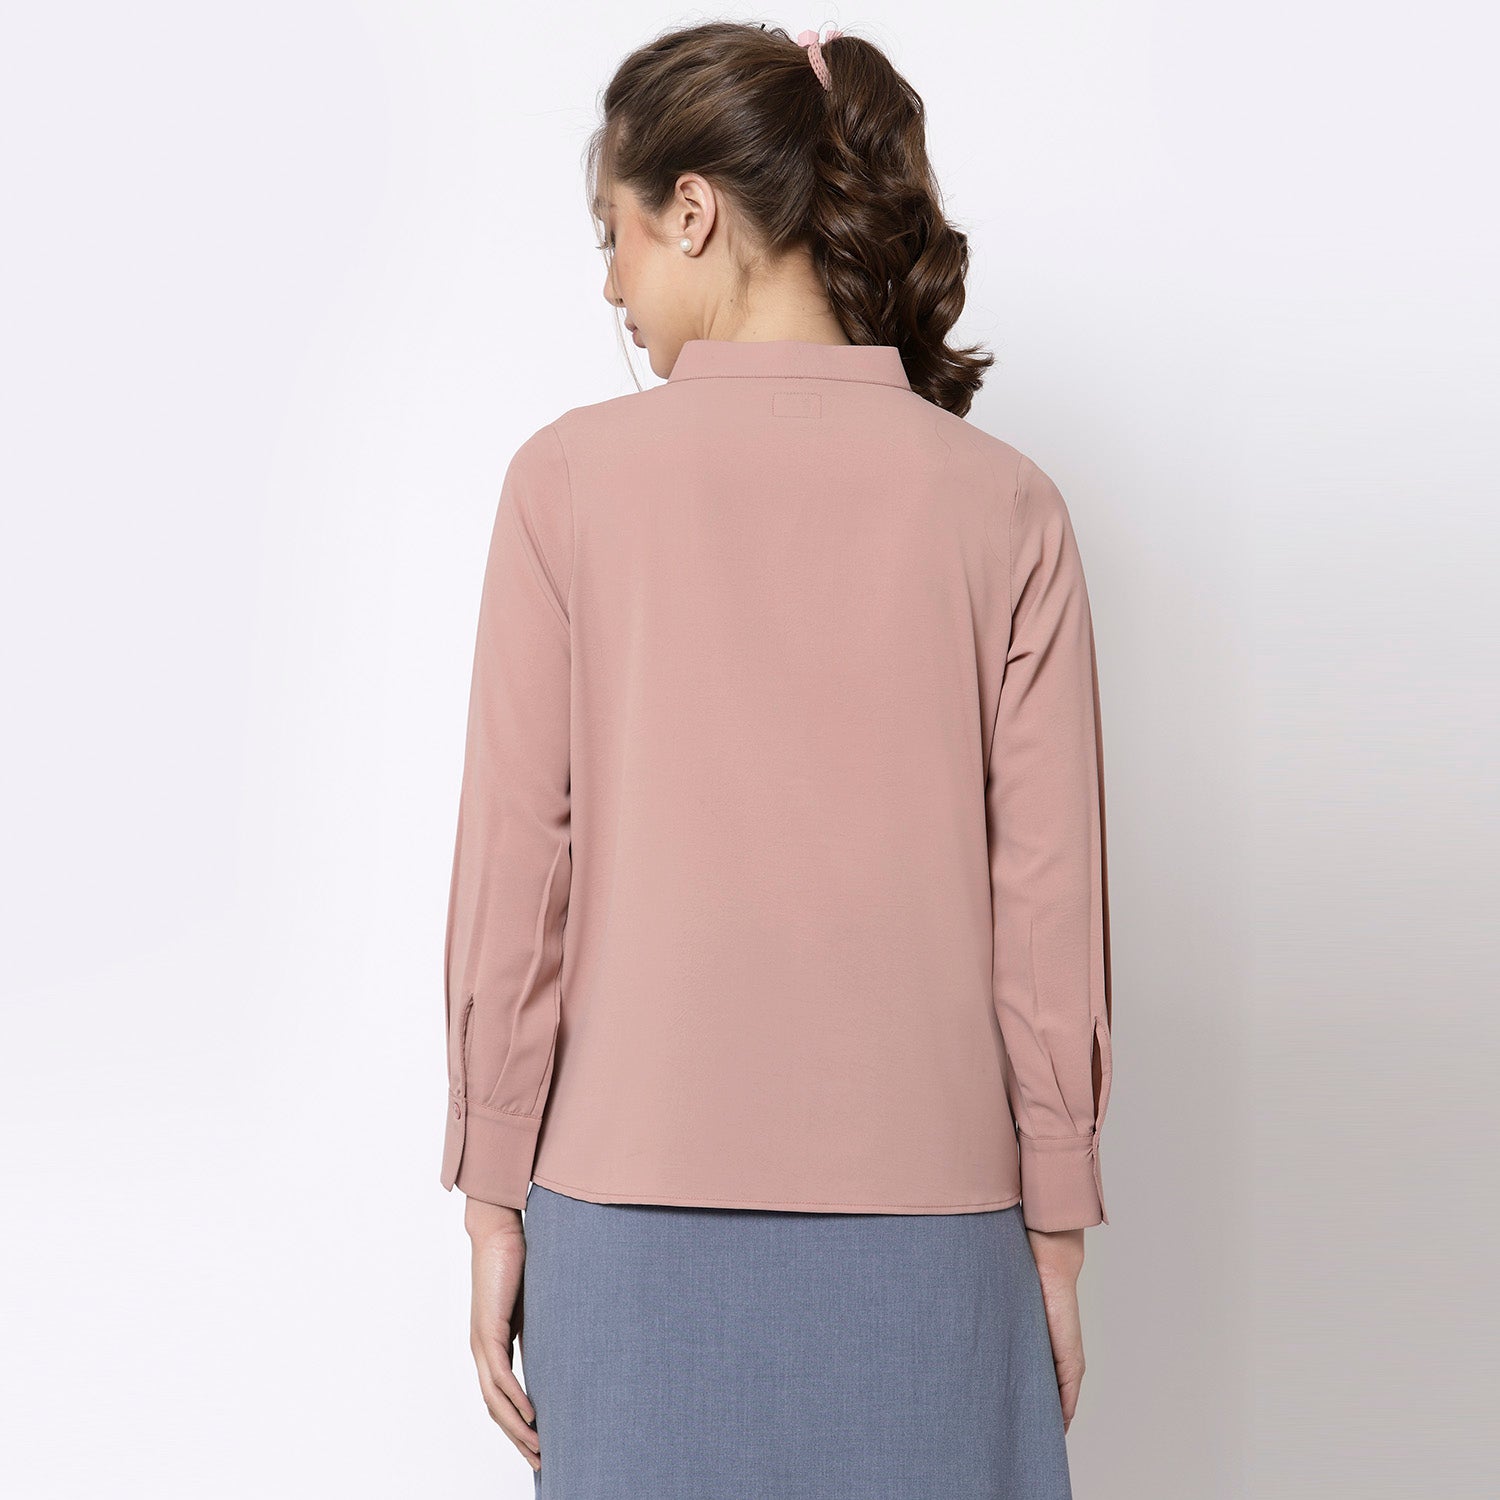 Peach top with frill collar